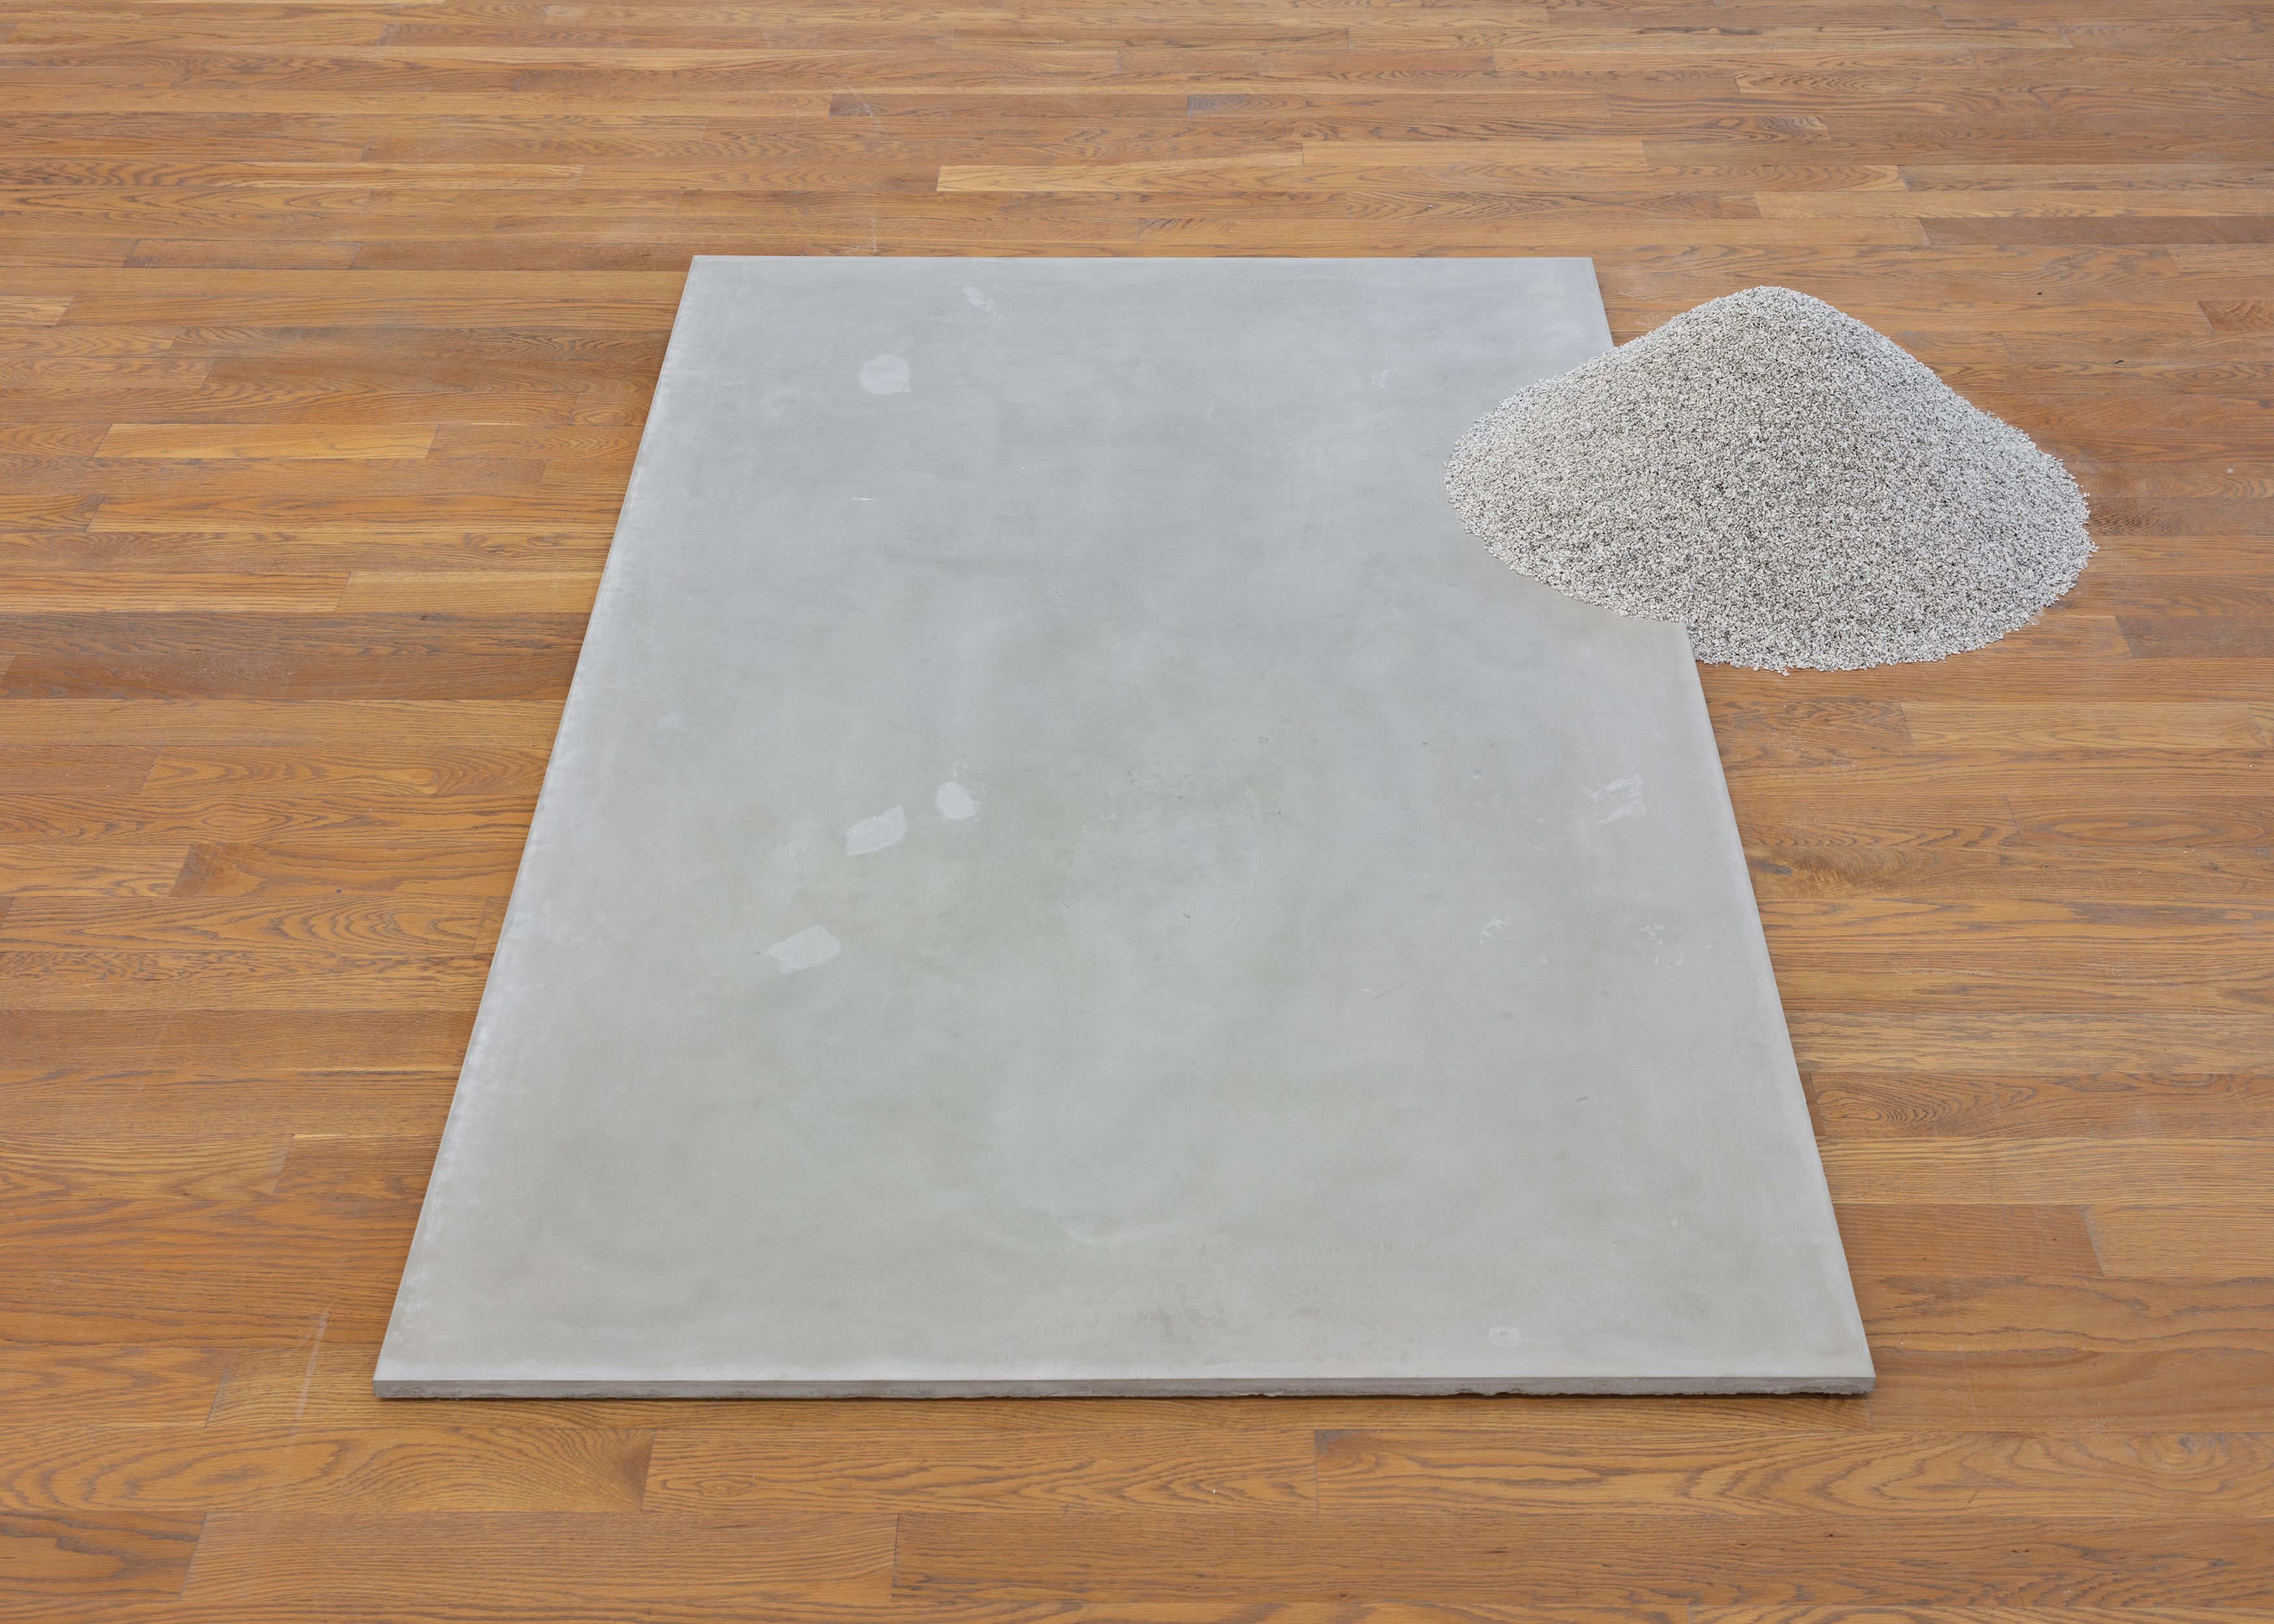 Stephen Lichty, Repose 4, 2021, concrete and crushed granite, 12 x 66 x 77 in. (30.48 x 167.64 x 195.58 cm)